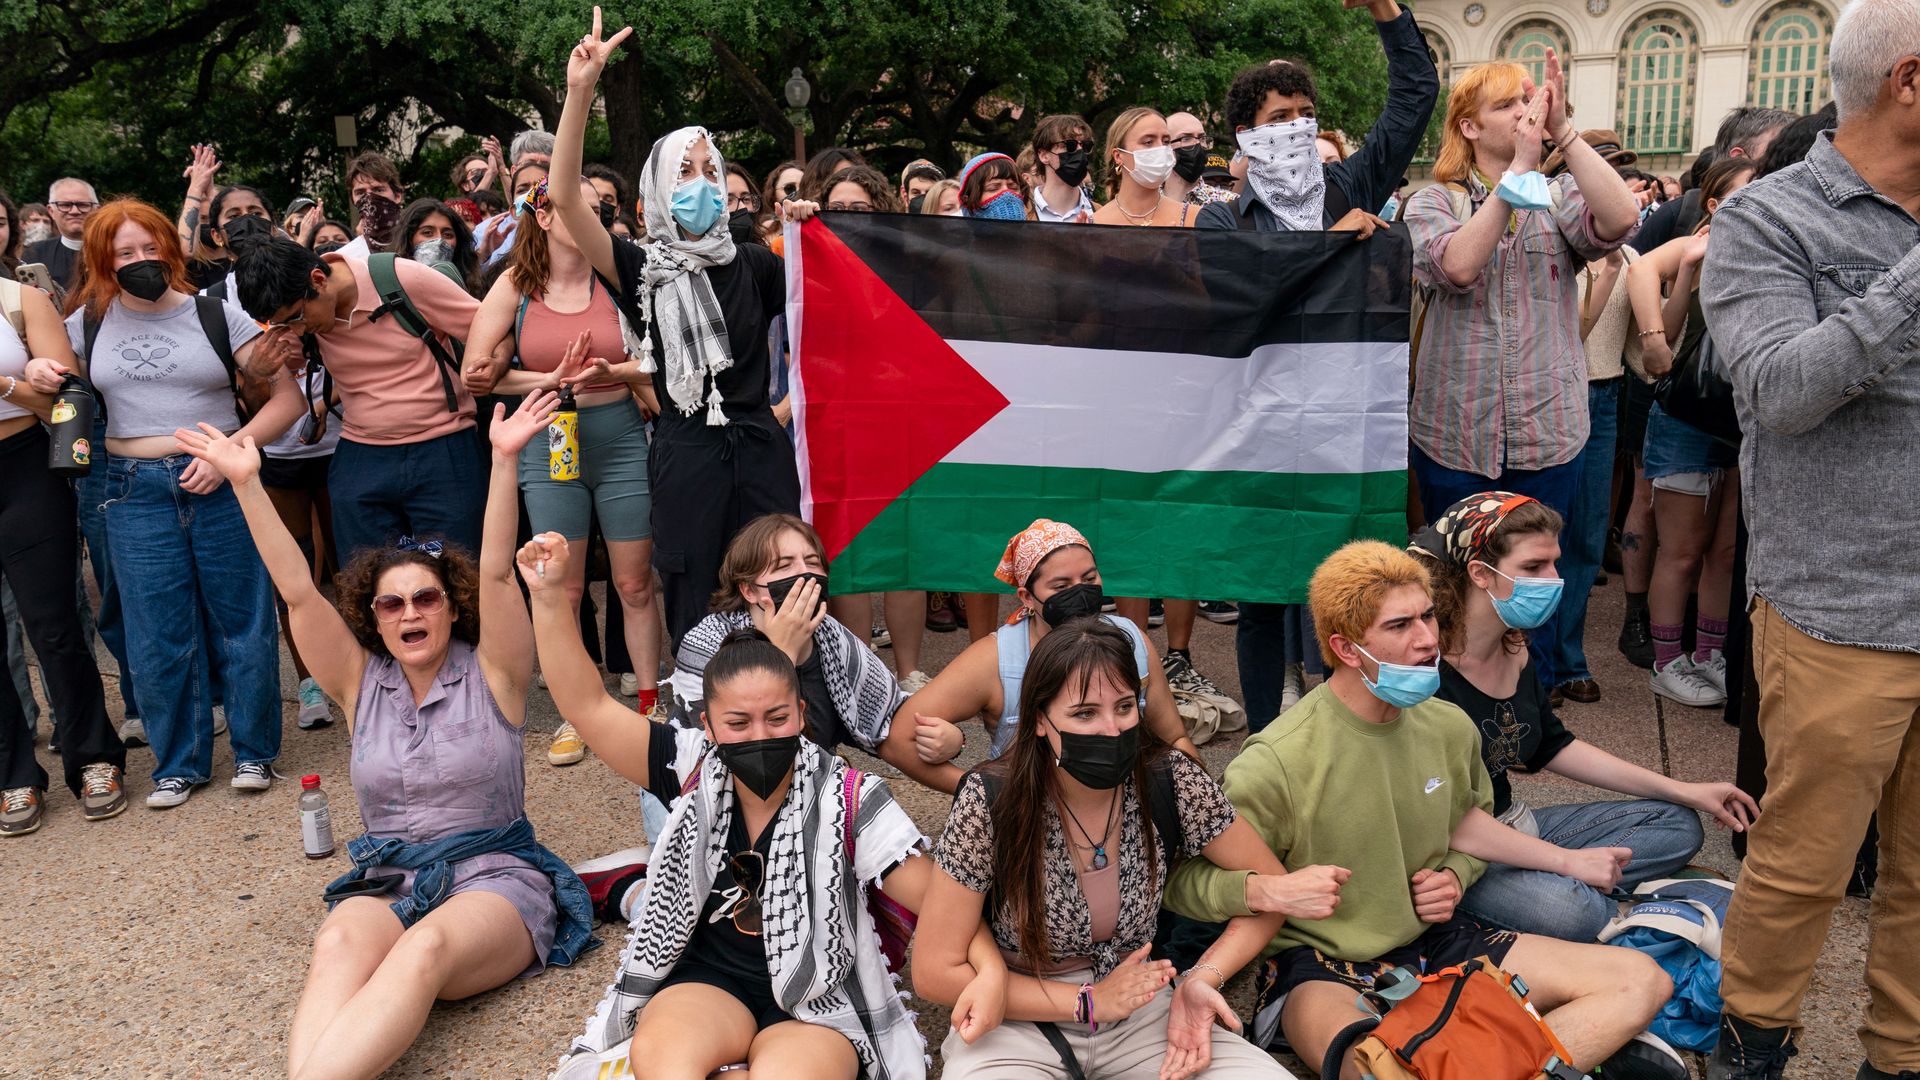 A photo of students holding up a Palestinian flag during a protest